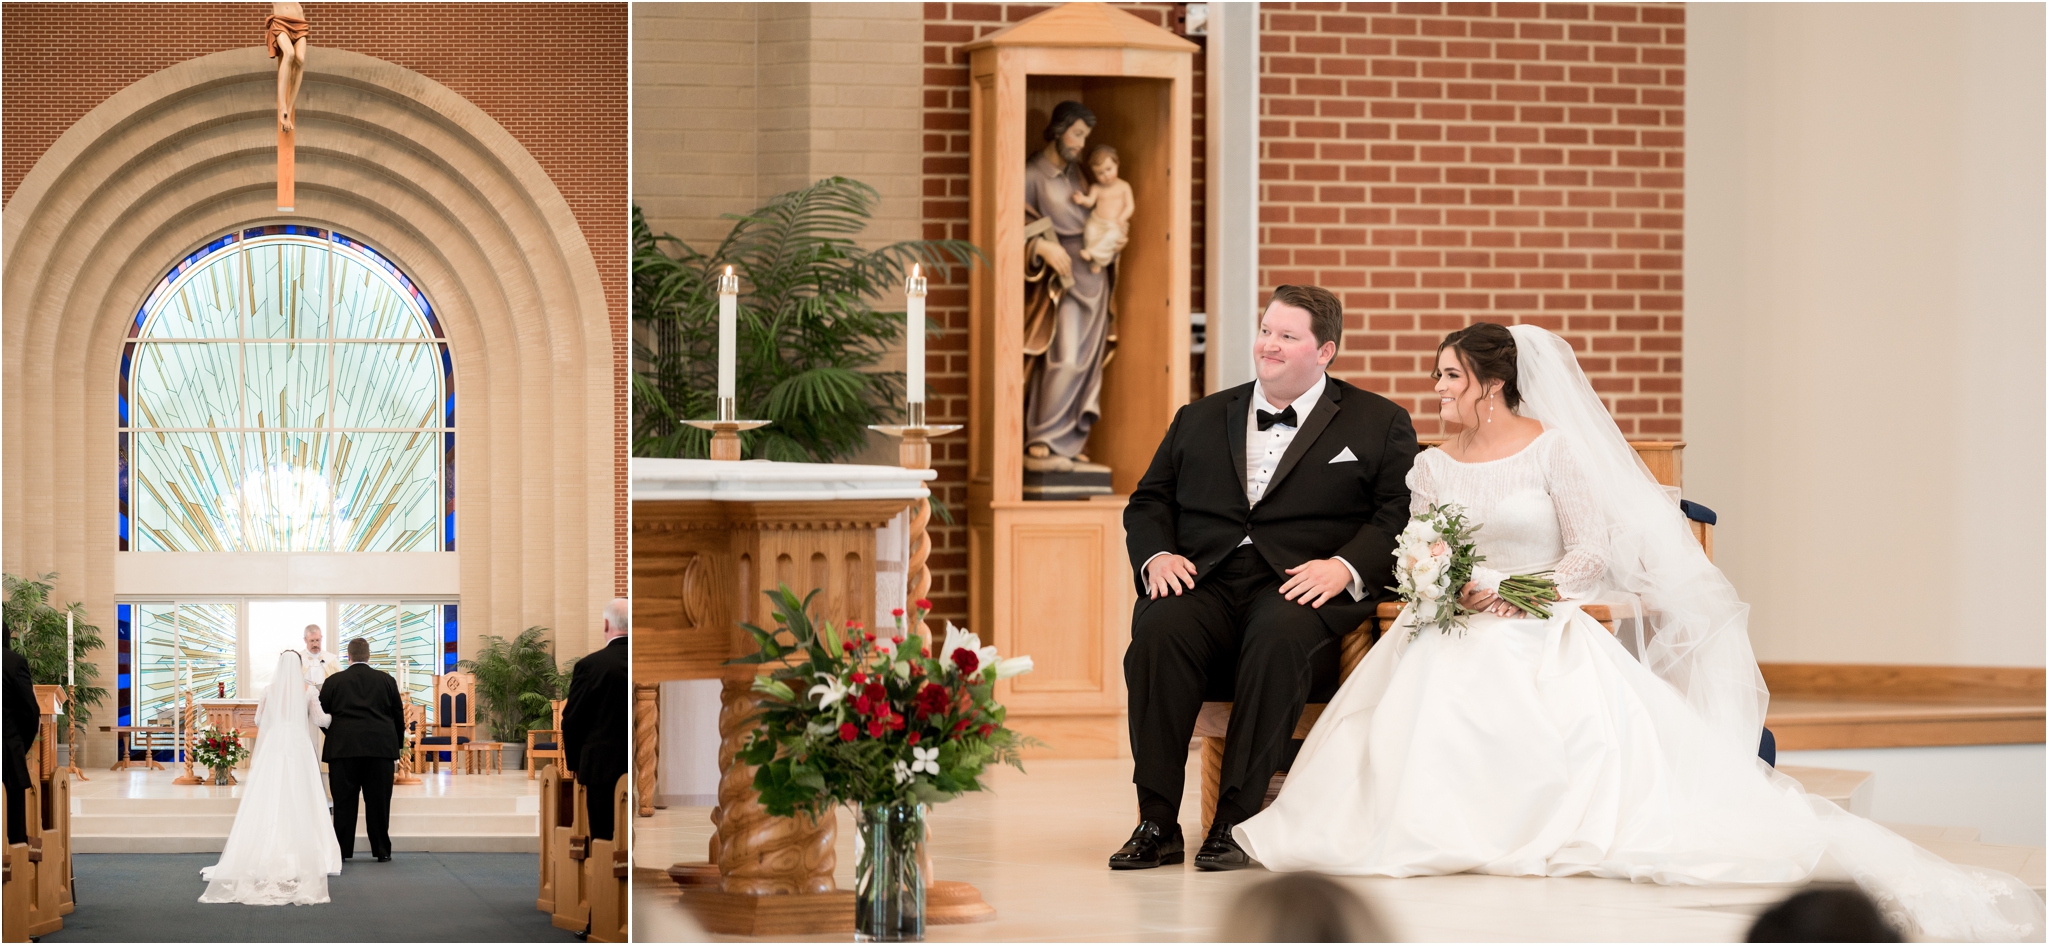 getting married at Saint Maria Goretti westfield indiana